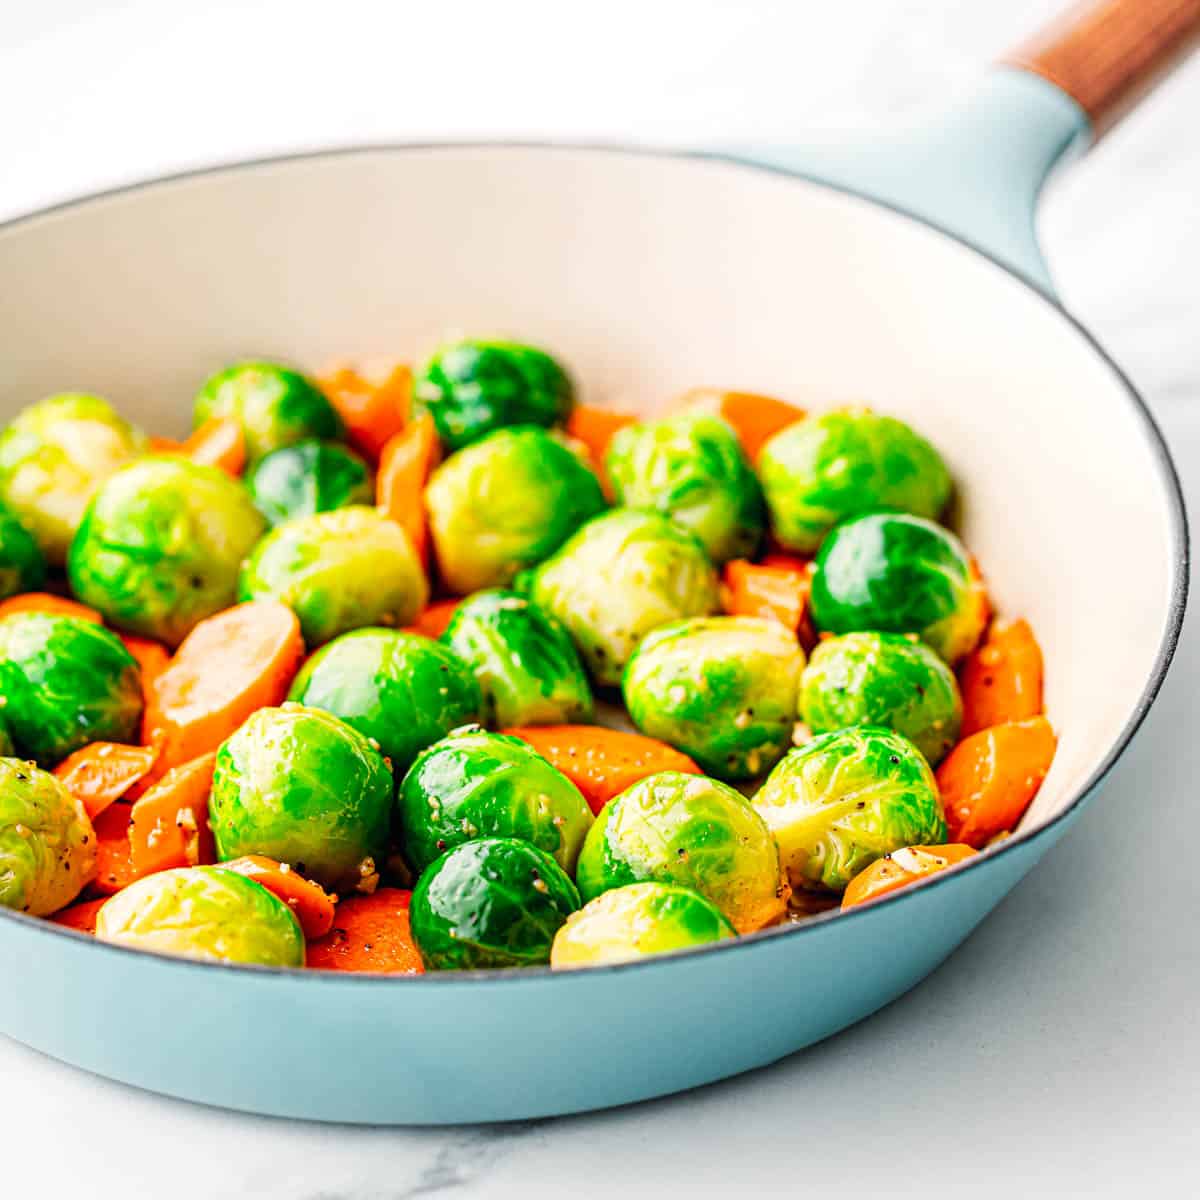 sautéed Brussels sprouts and carrots recipe..